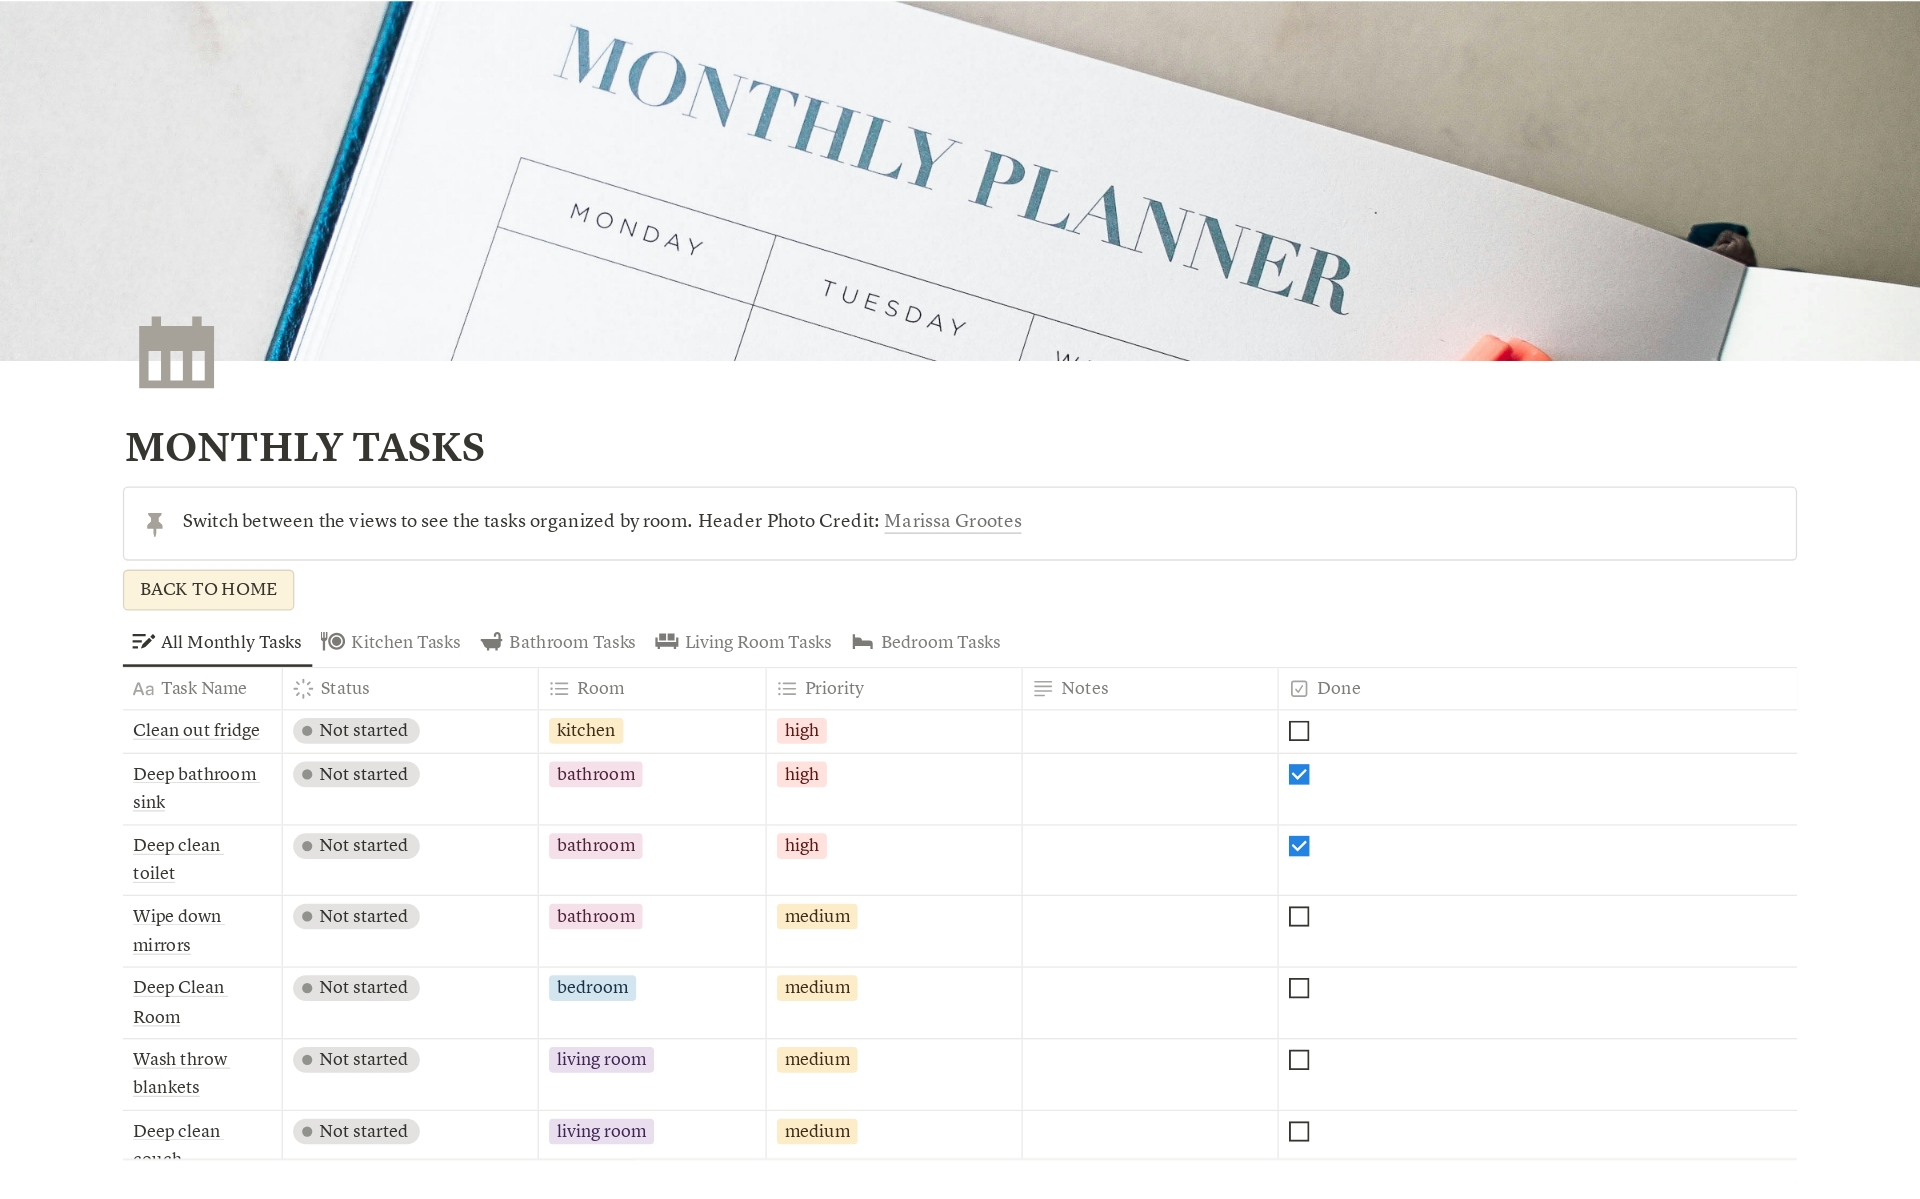 This template is designed to help you organize your cleaning tasks for your home. Complete with functional databases and buttons, this planner allows for a streamlined experience that gives you the option to organize tasks by room.